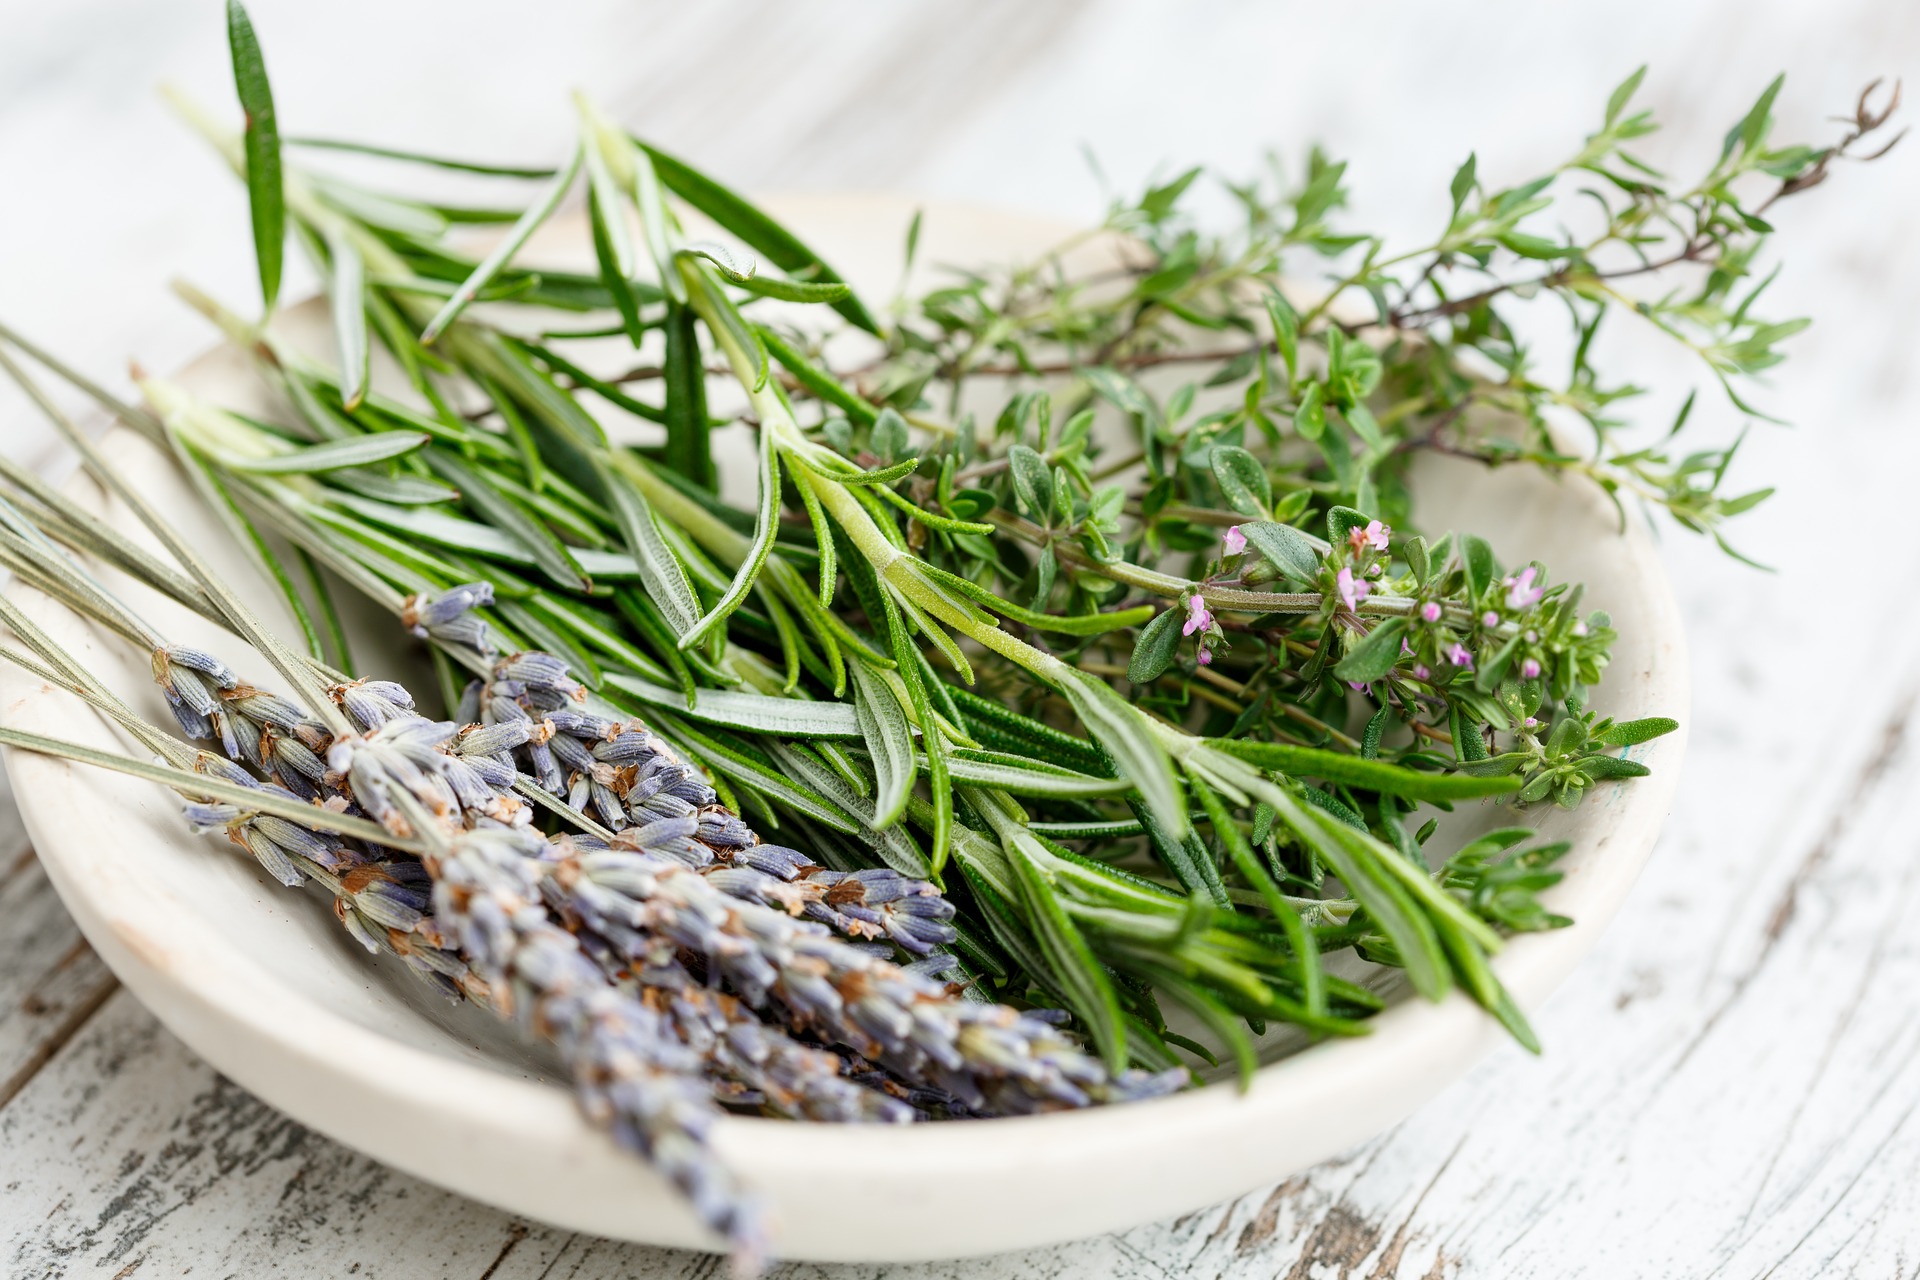 FIND OUT MORE ABOUT HERBES DE PROVENCE